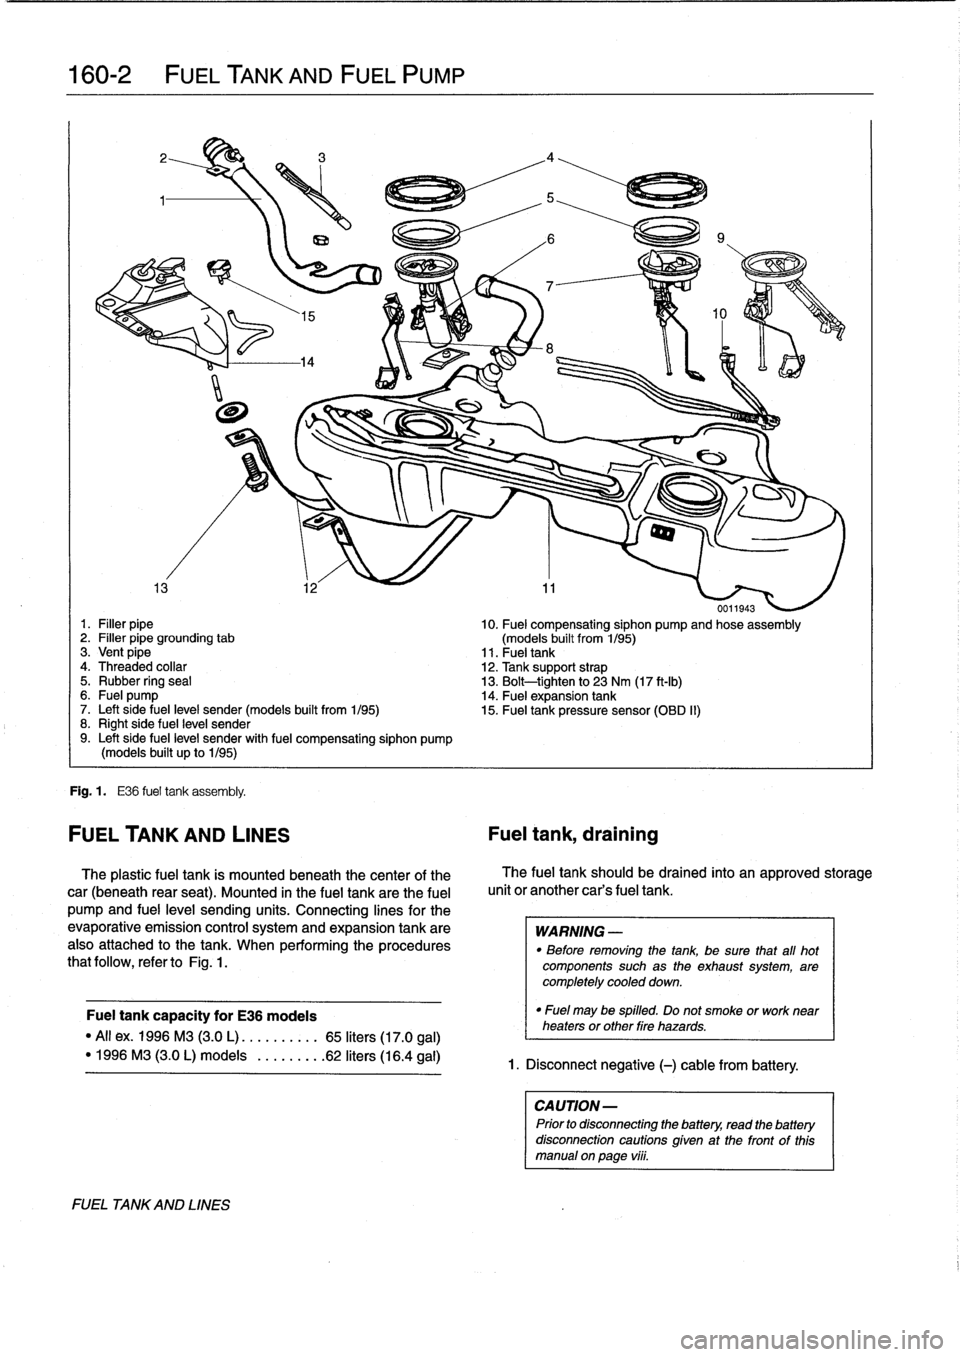 BMW 323i 1997 E36 Workshop Manual 
160-2

	

FUEL
TANK
AND
FUEL
PUMP

0011943
1
.
Filler
pipe

	

10
.
Fuel
compensating
siphon
pump
and
hose
assembly
2
.
Filler
pipe
grounding
tab

	

(models
built
from
1/95)
3
.
Vent
pipe

	

11
.
F